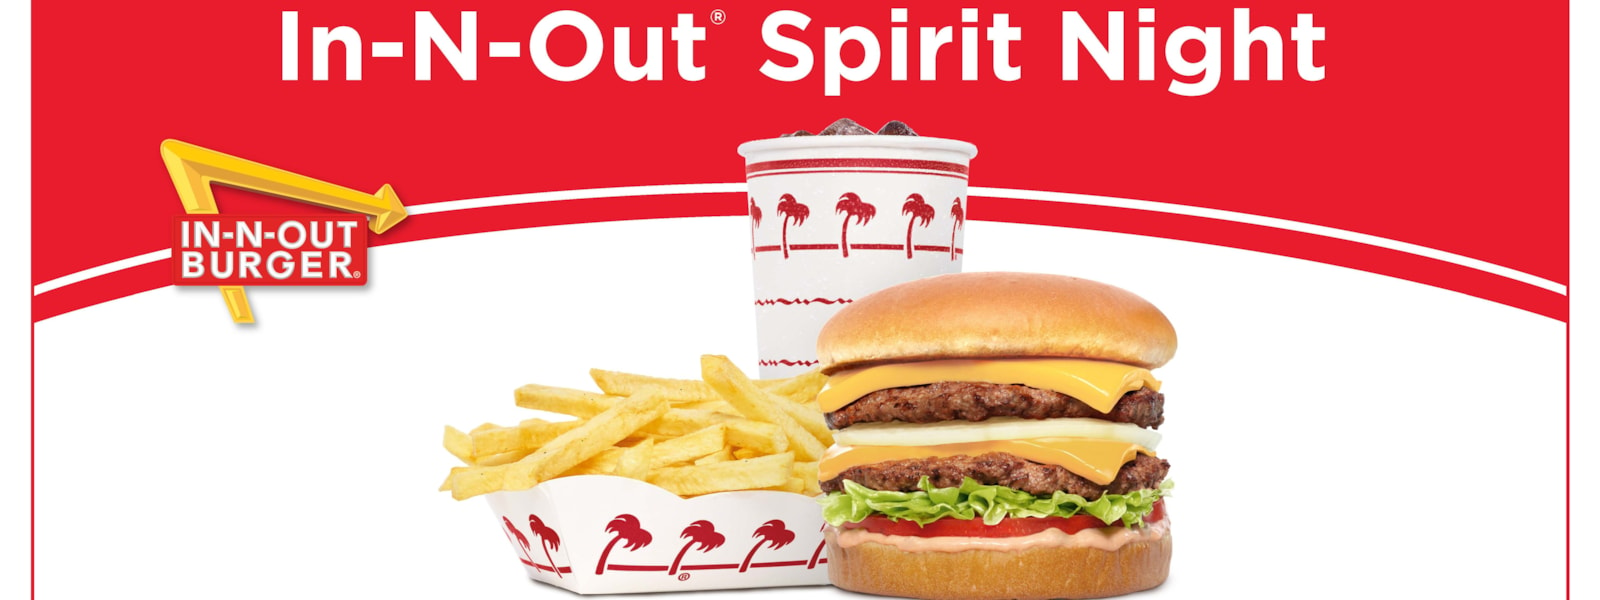 In -N-Out hamburger, fries and a drink with the logo and words In- N -Out Spirit Night